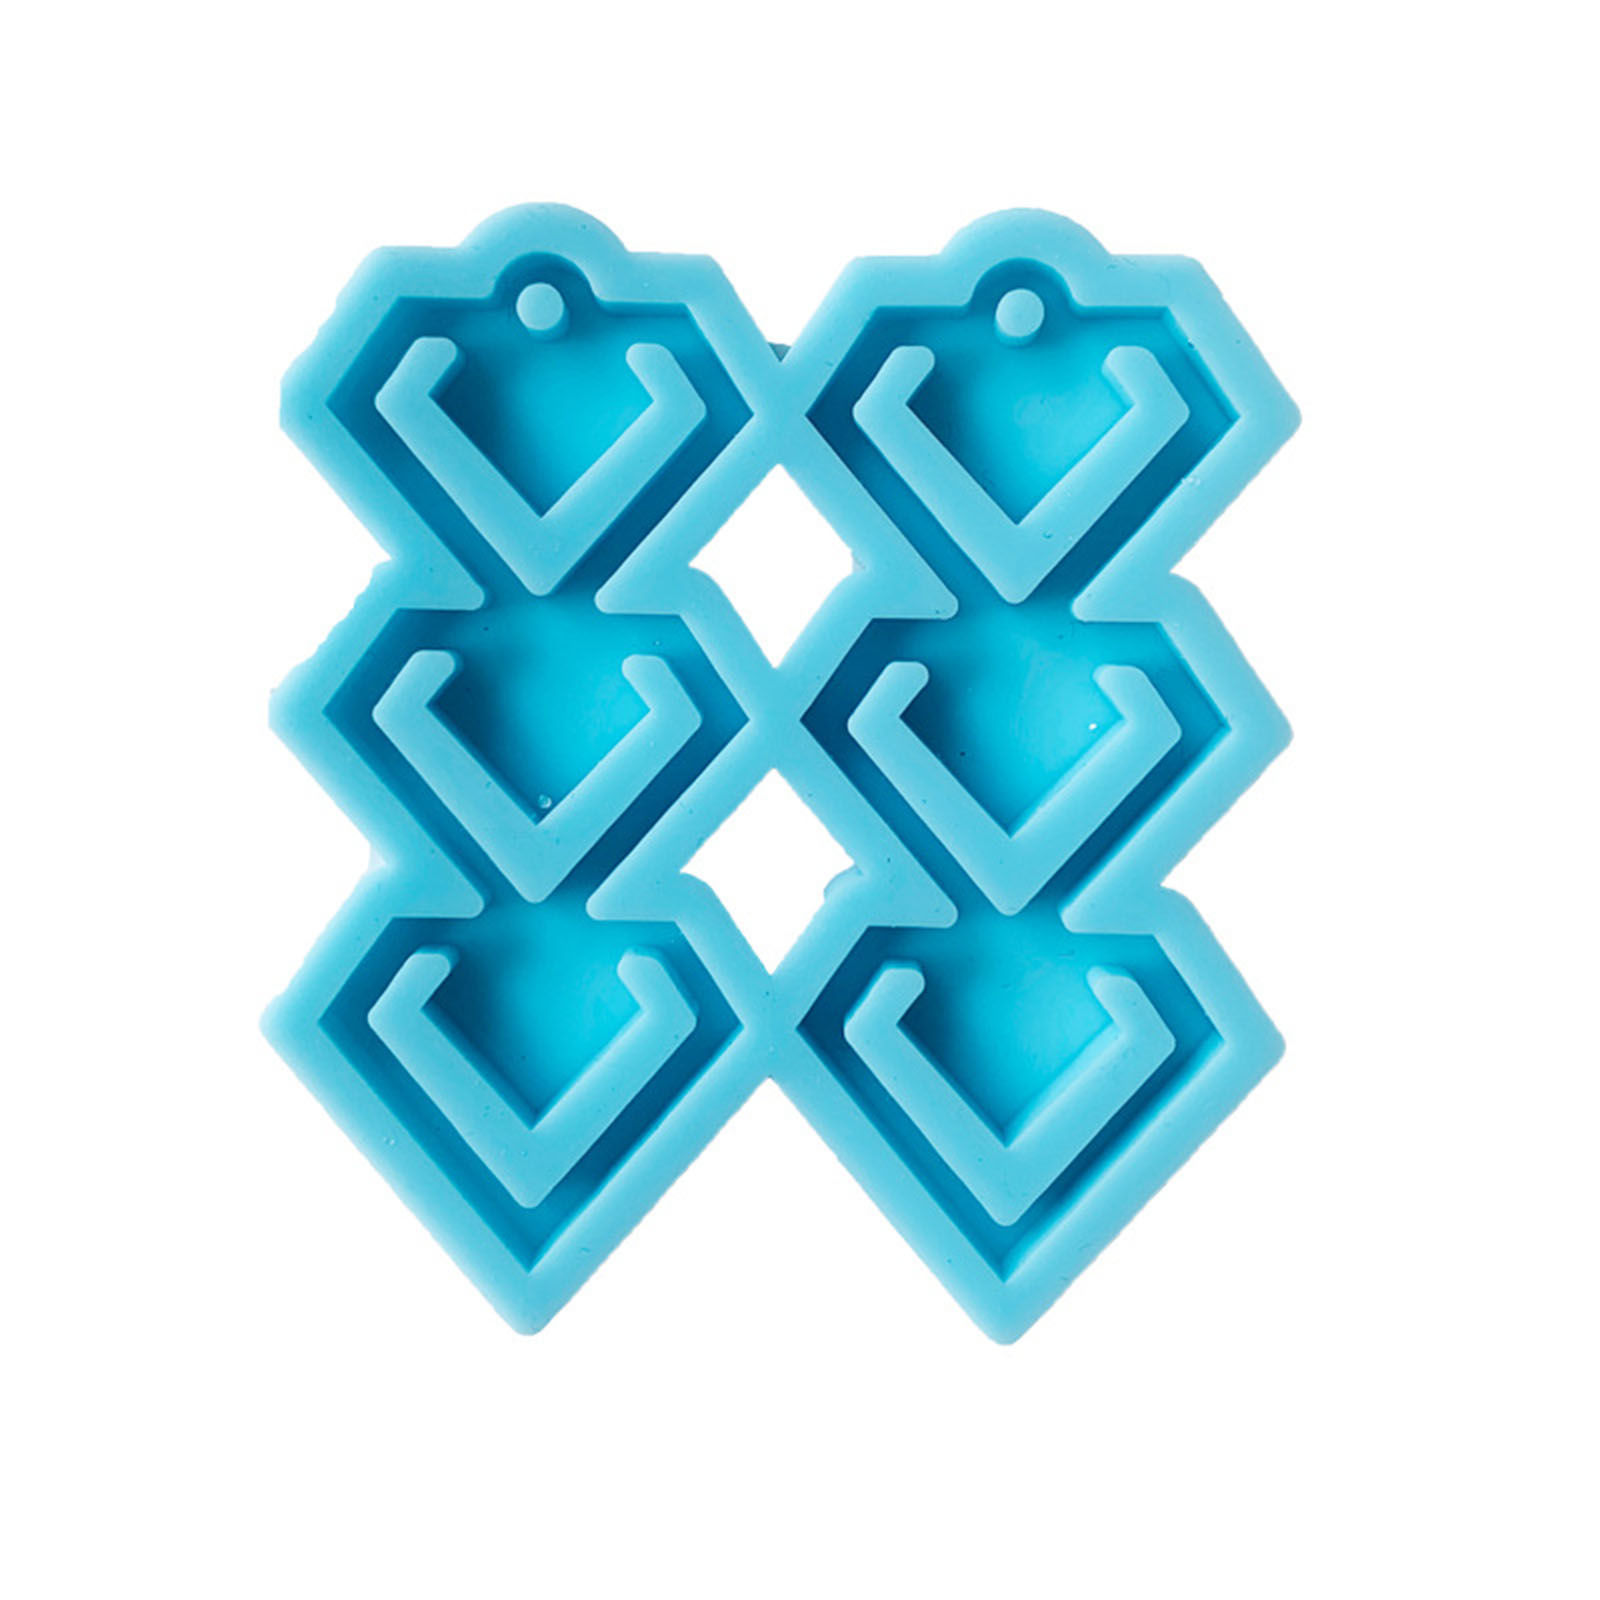 Picture of Silicone Resin Mold For Jewelry Making Pendant Earrings Keychain Diamond Shape Blue 7cm x 6.3cm, 1 Piece